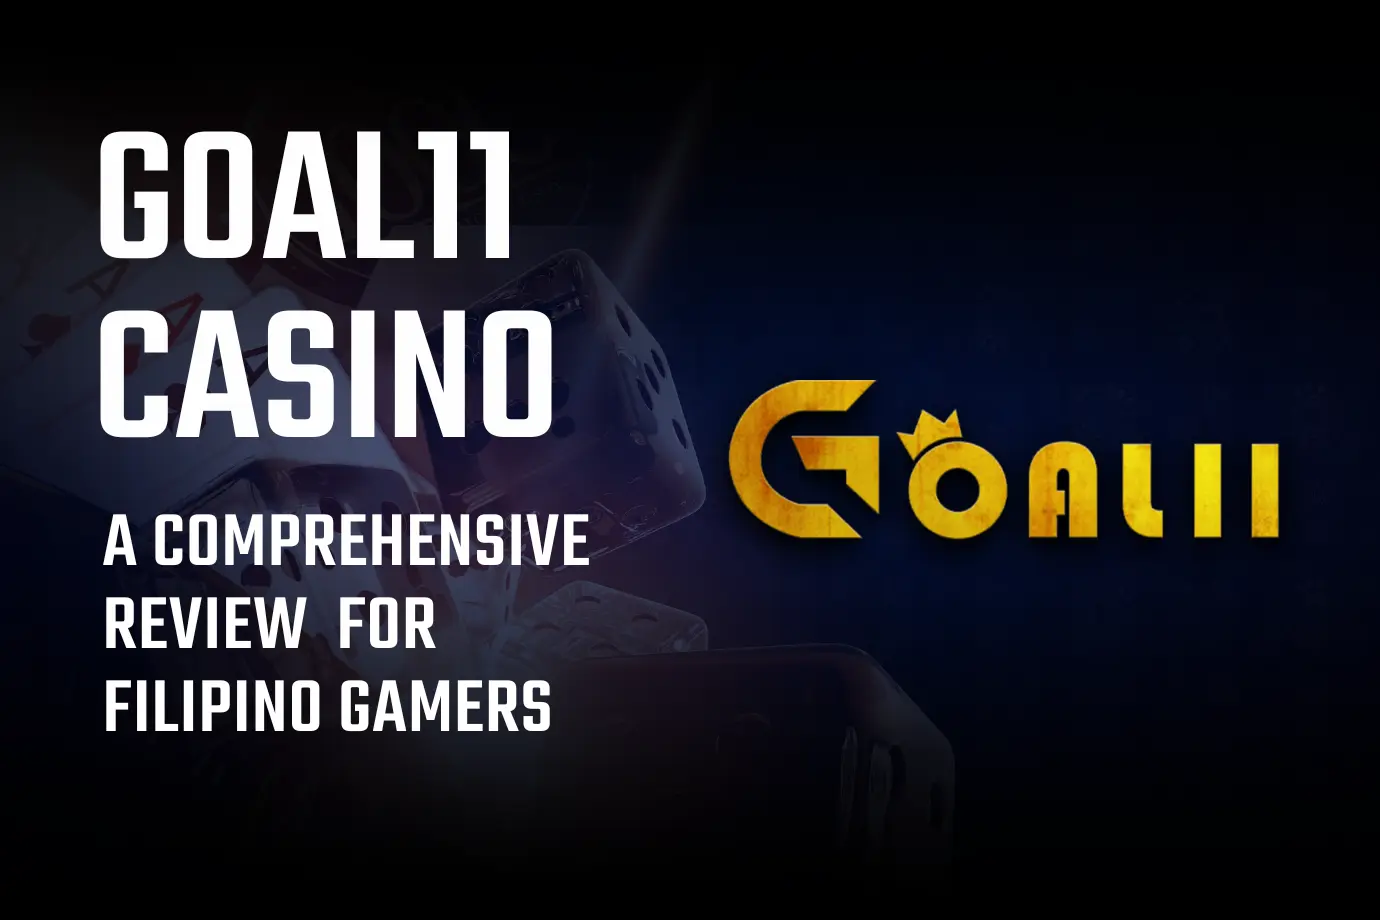 Goal11 Casino: A Comprehensive Review for Filipino Gamers